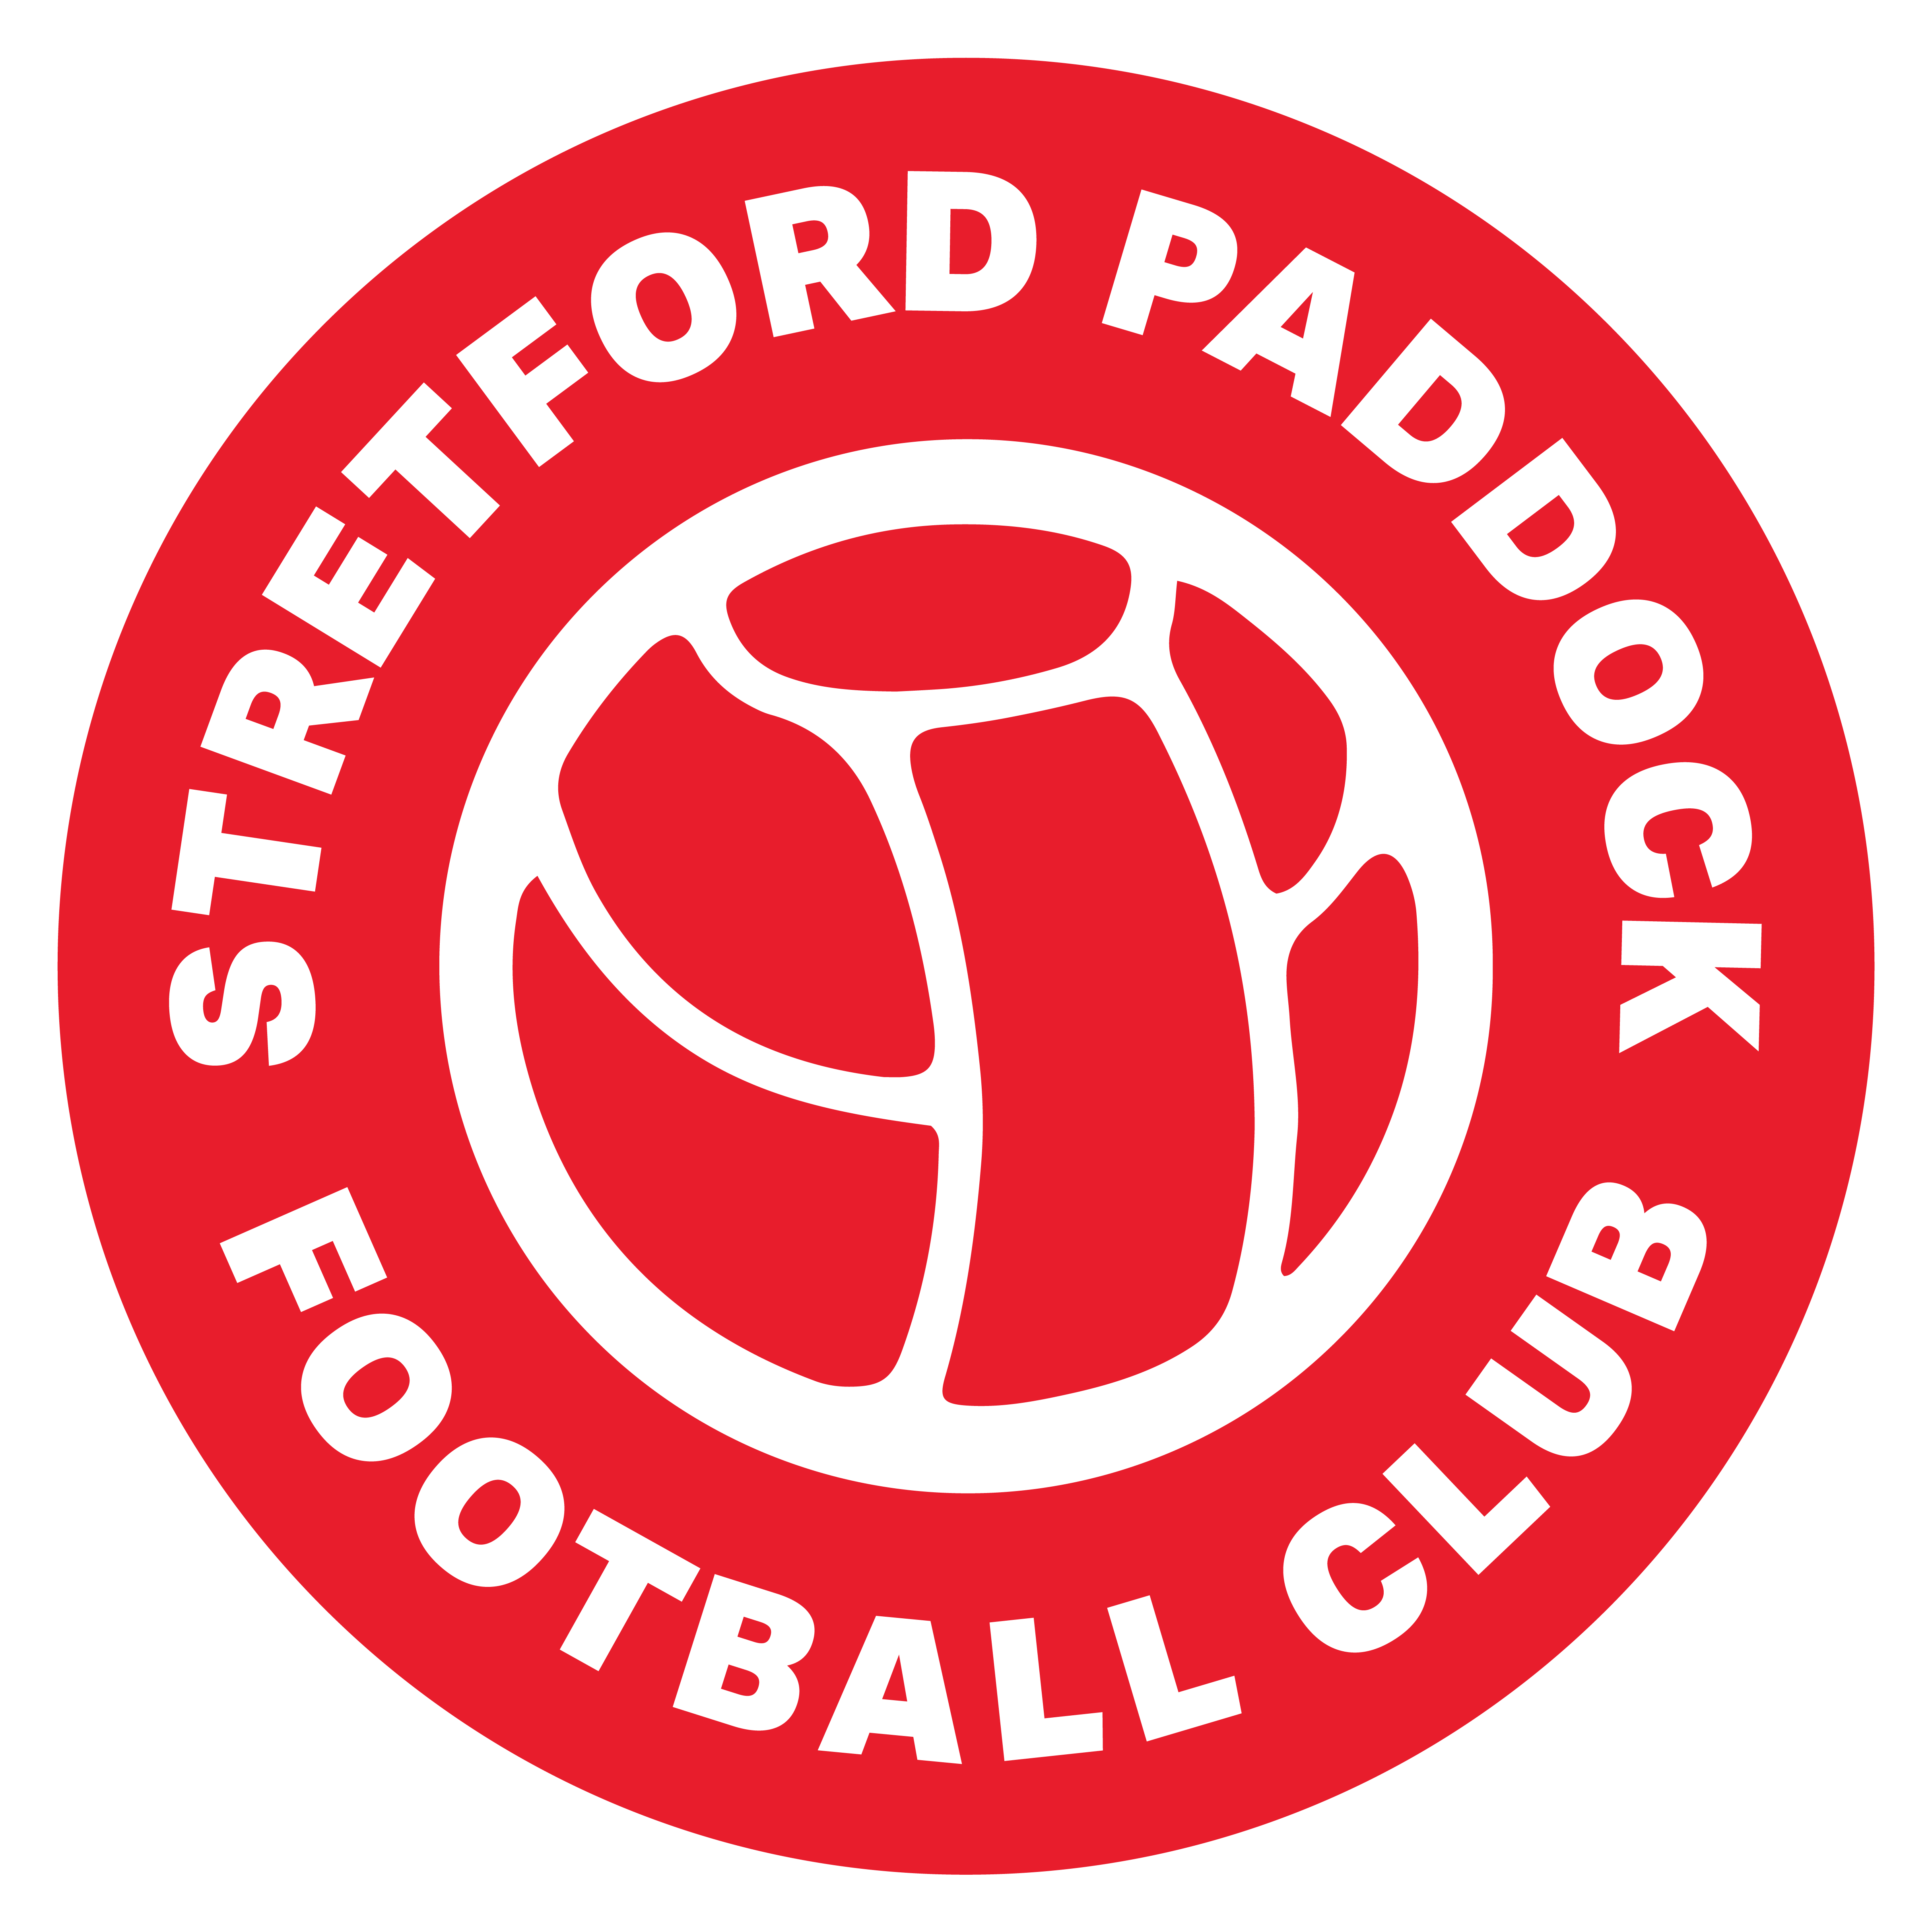 https://stretfordpaddockfc.com/wp-content/uploads/2021/04/cropped-Red-and-white-2-1-1.png